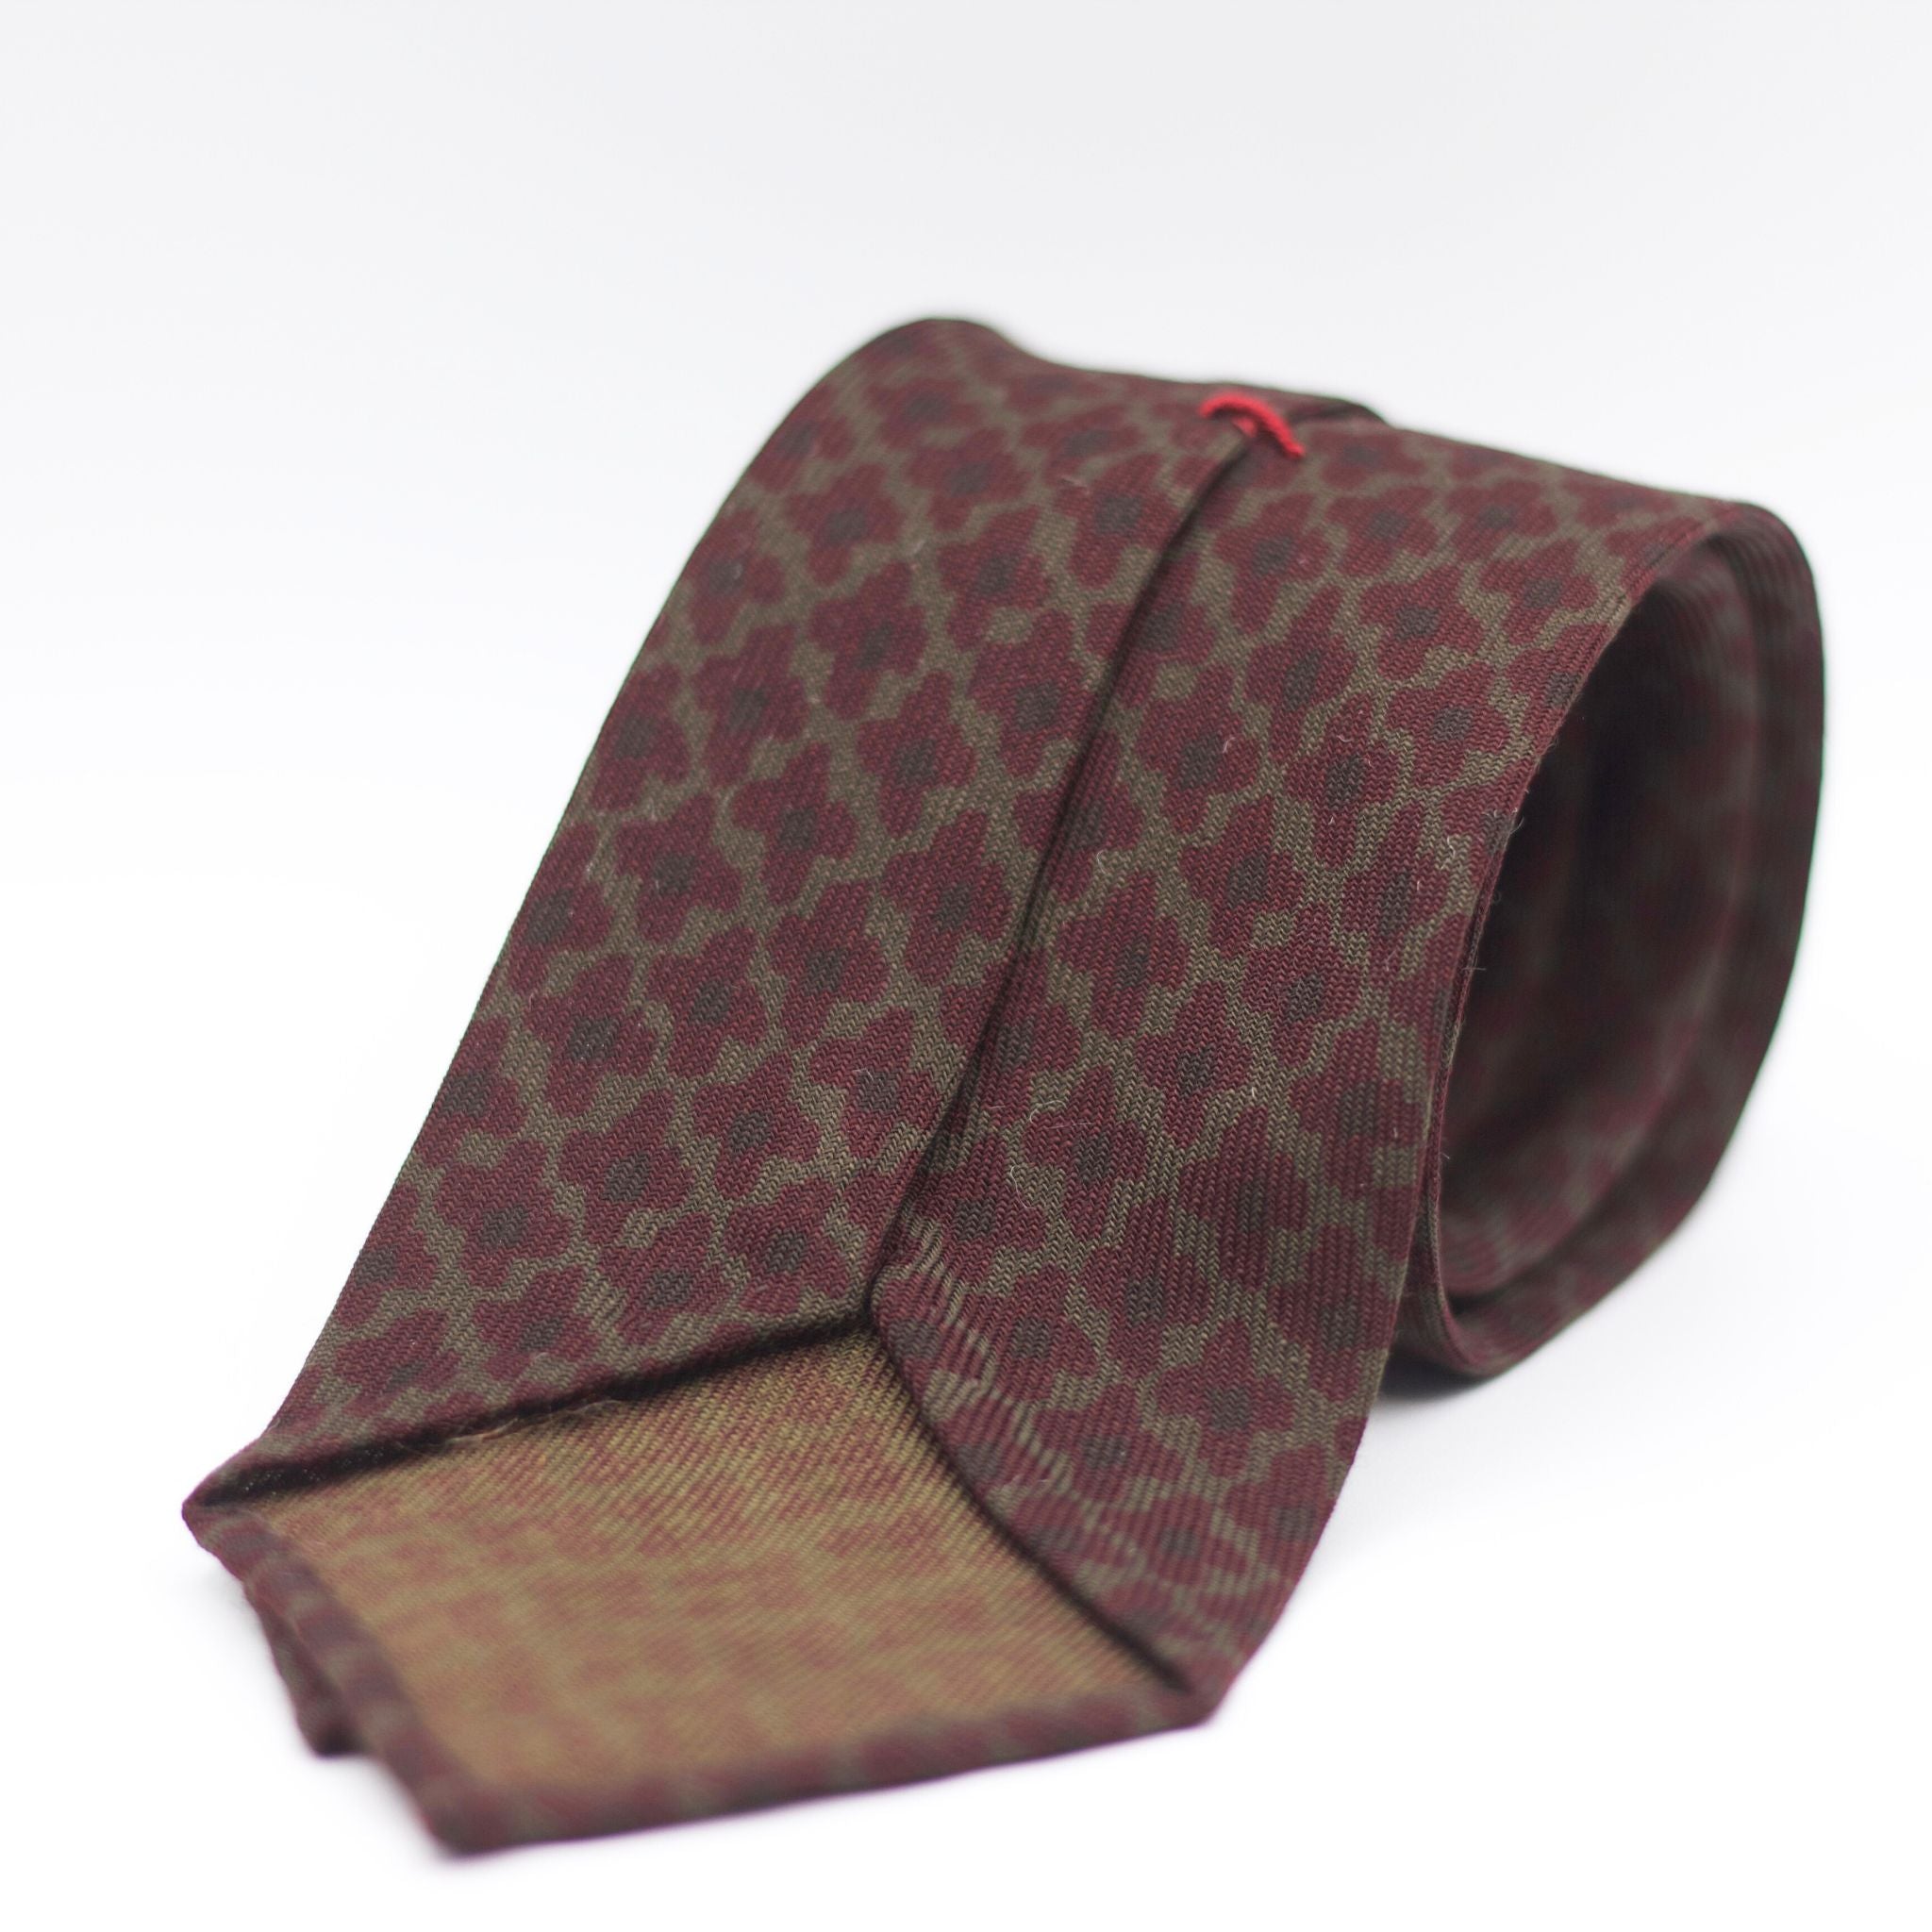 Cruciani & Bella 100%  Printed Wool  Unlined Hand rolled blades Green and Burgundy  Motifs Tie Handmade in Italy 8 cm x 150 cm